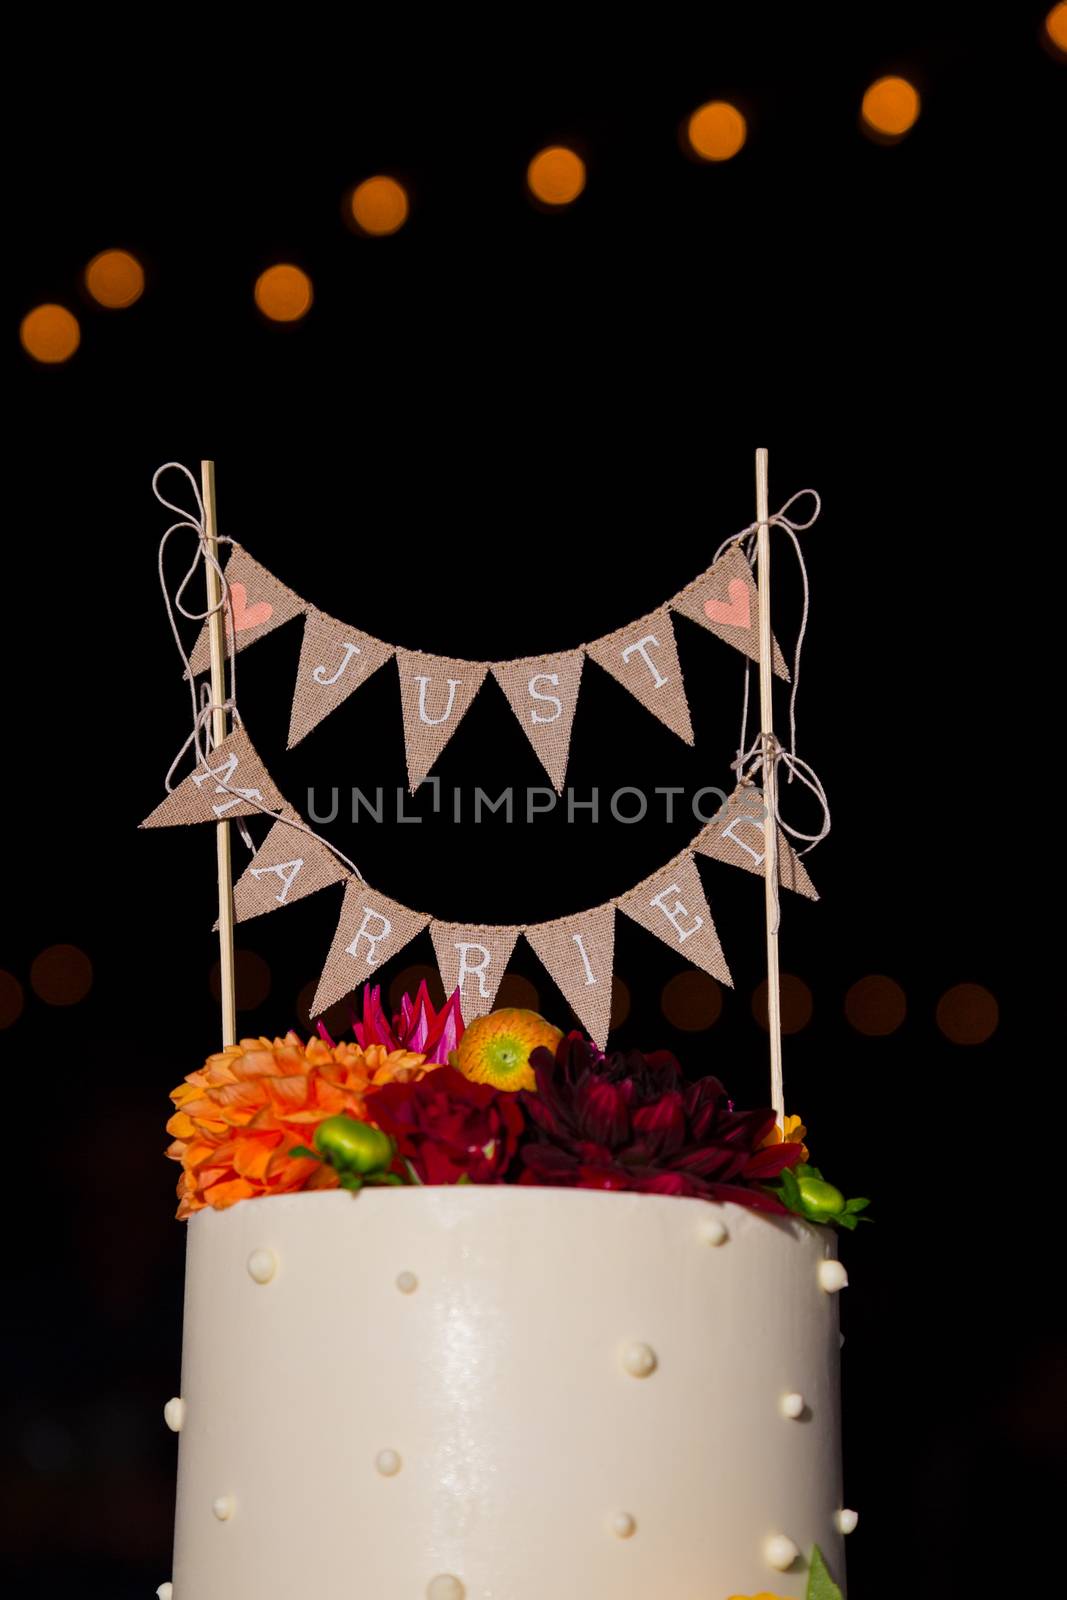 Just Married Cake Topper by joshuaraineyphotography